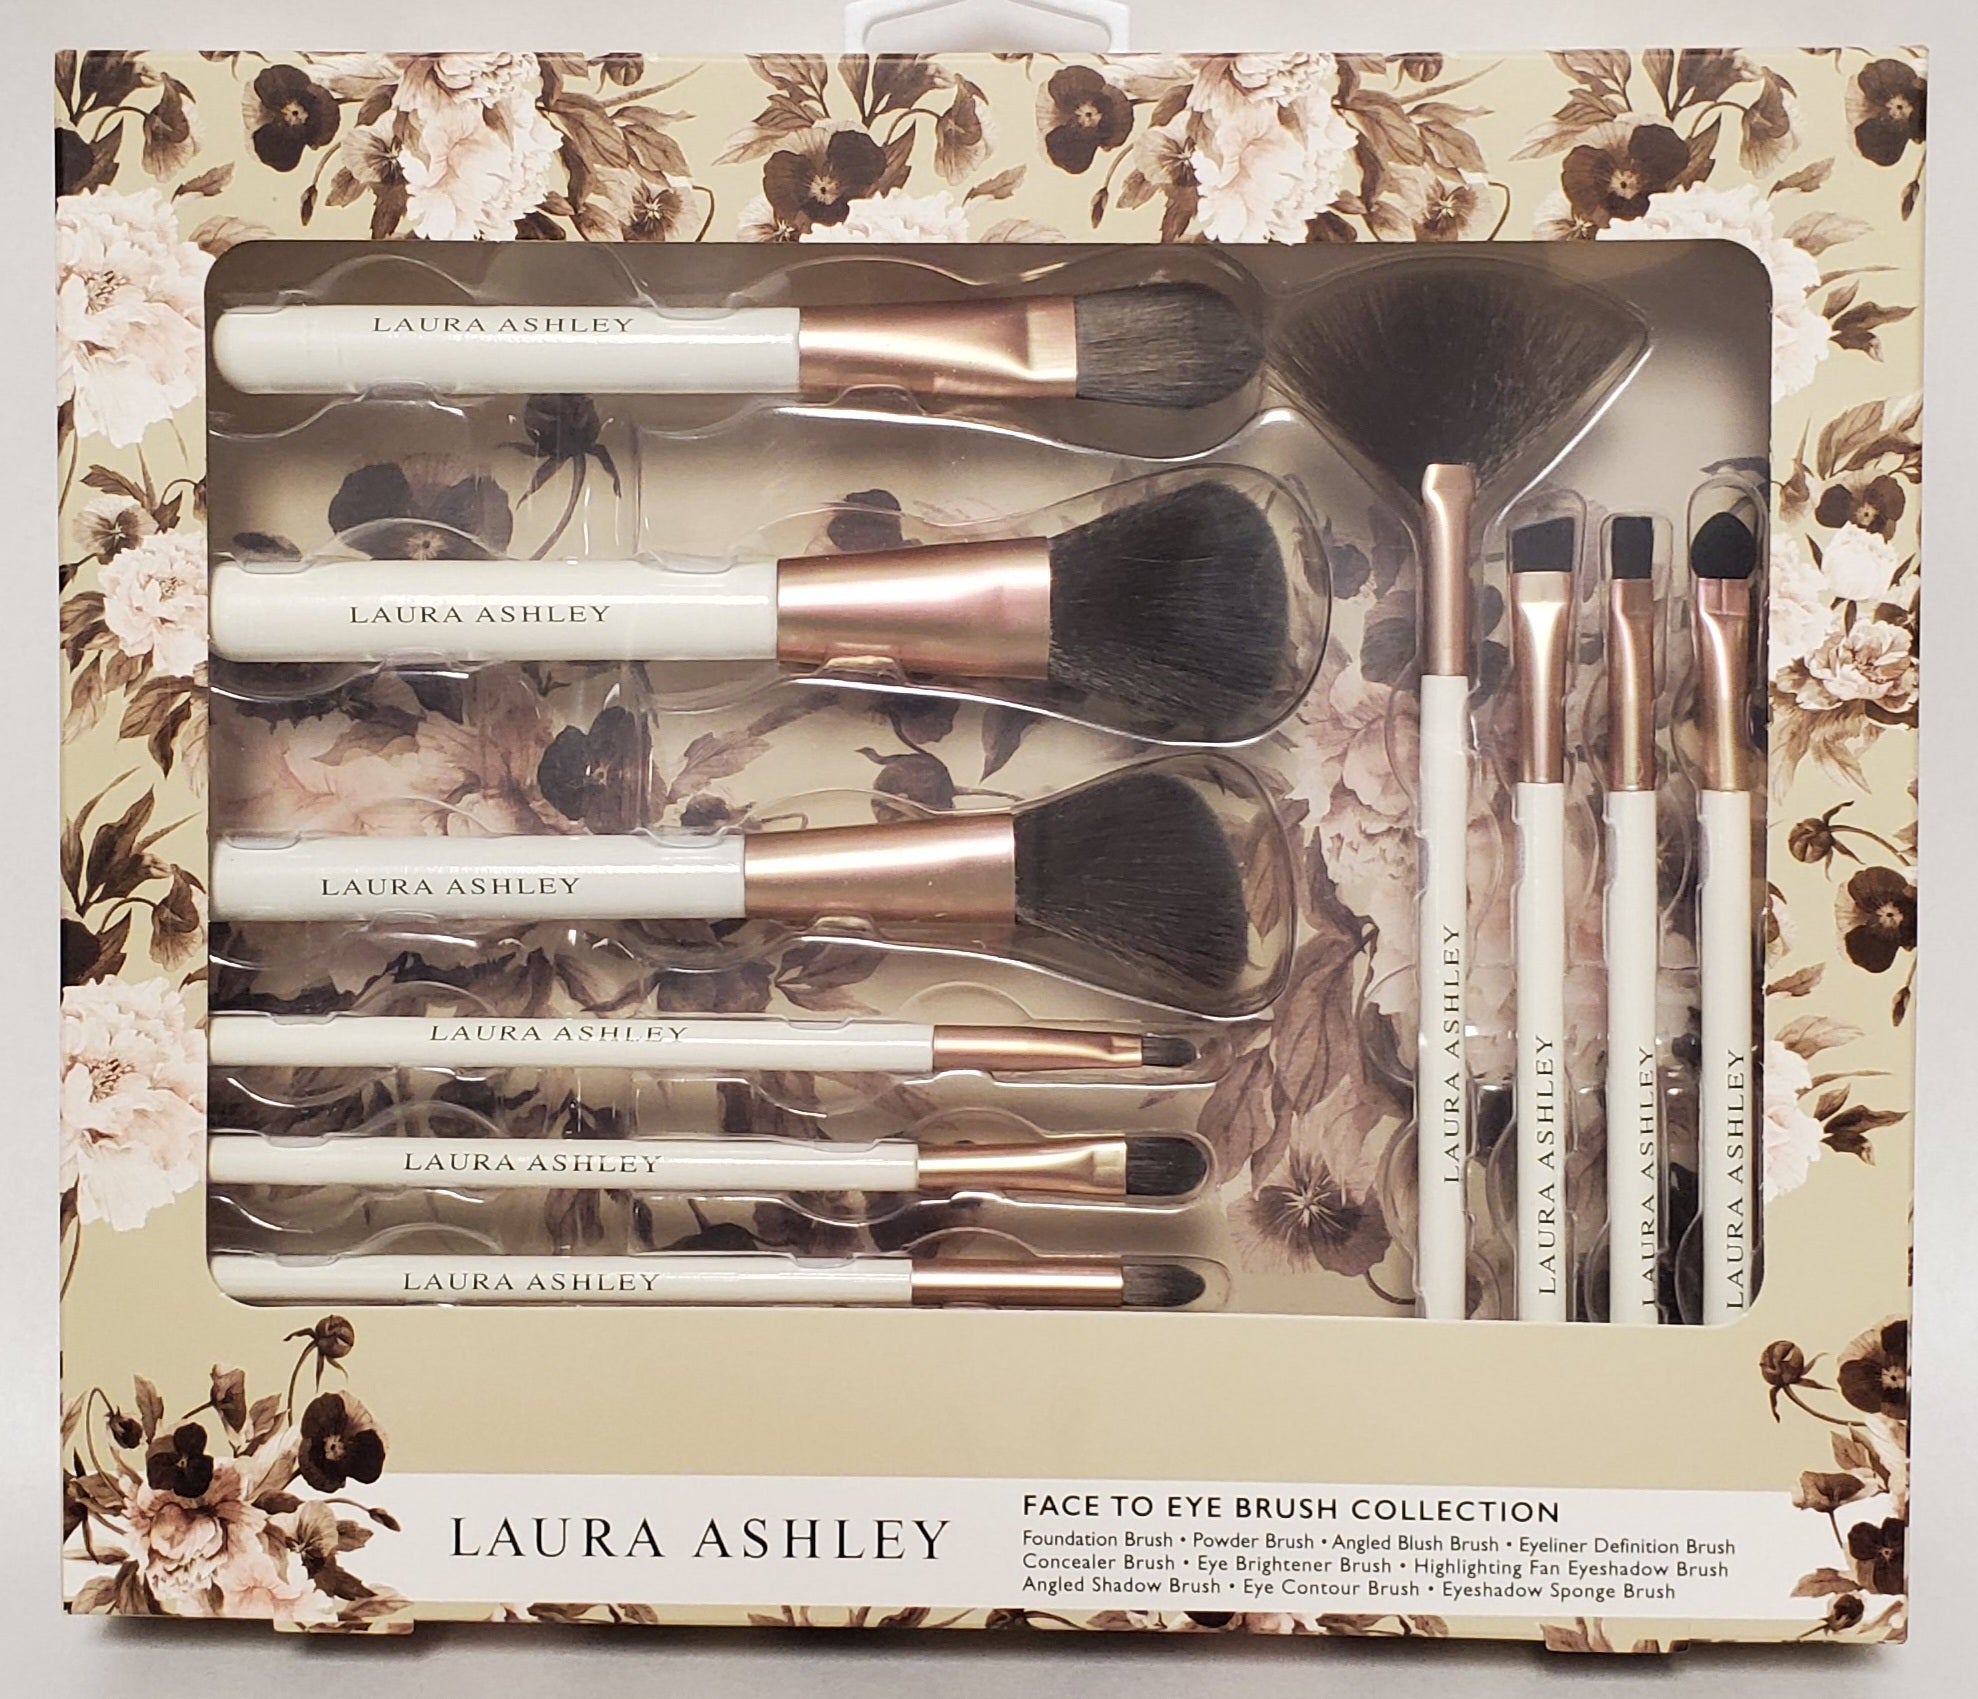 Laura Ashley Face to Eye Brush Collection